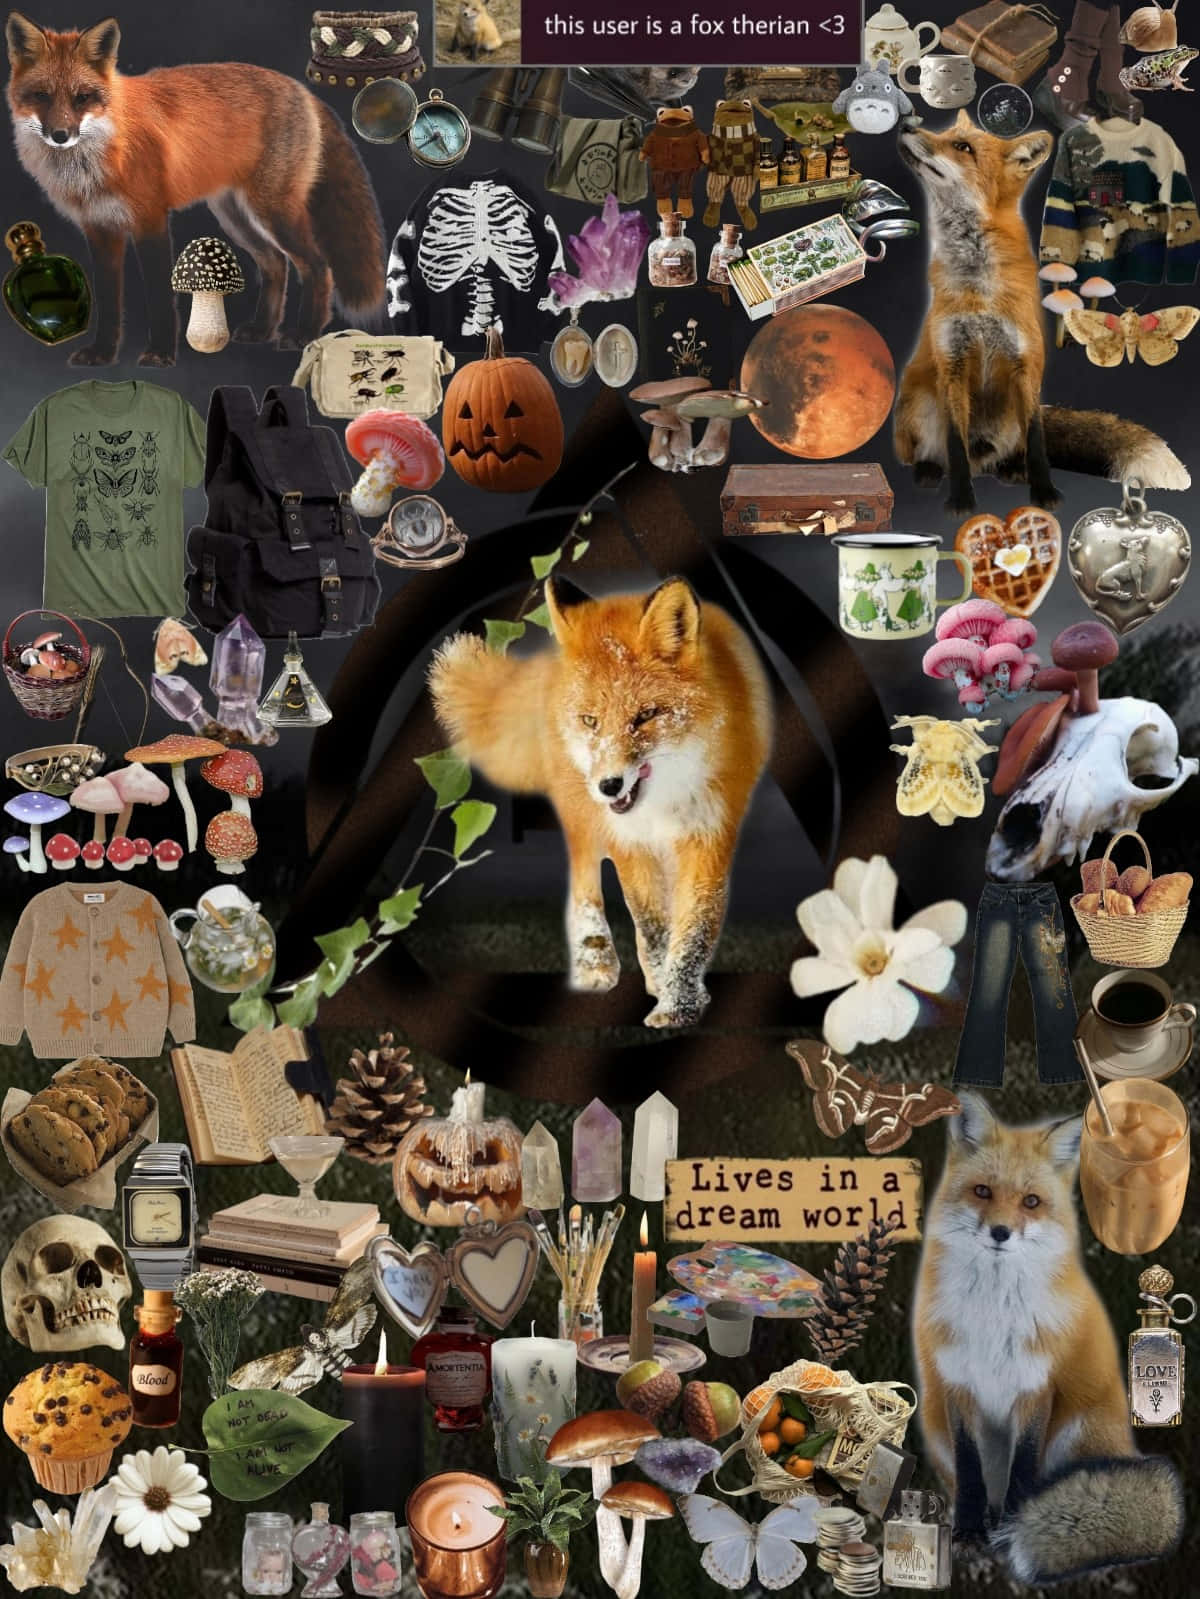 Fox Therian Collage Aesthetic Wallpaper